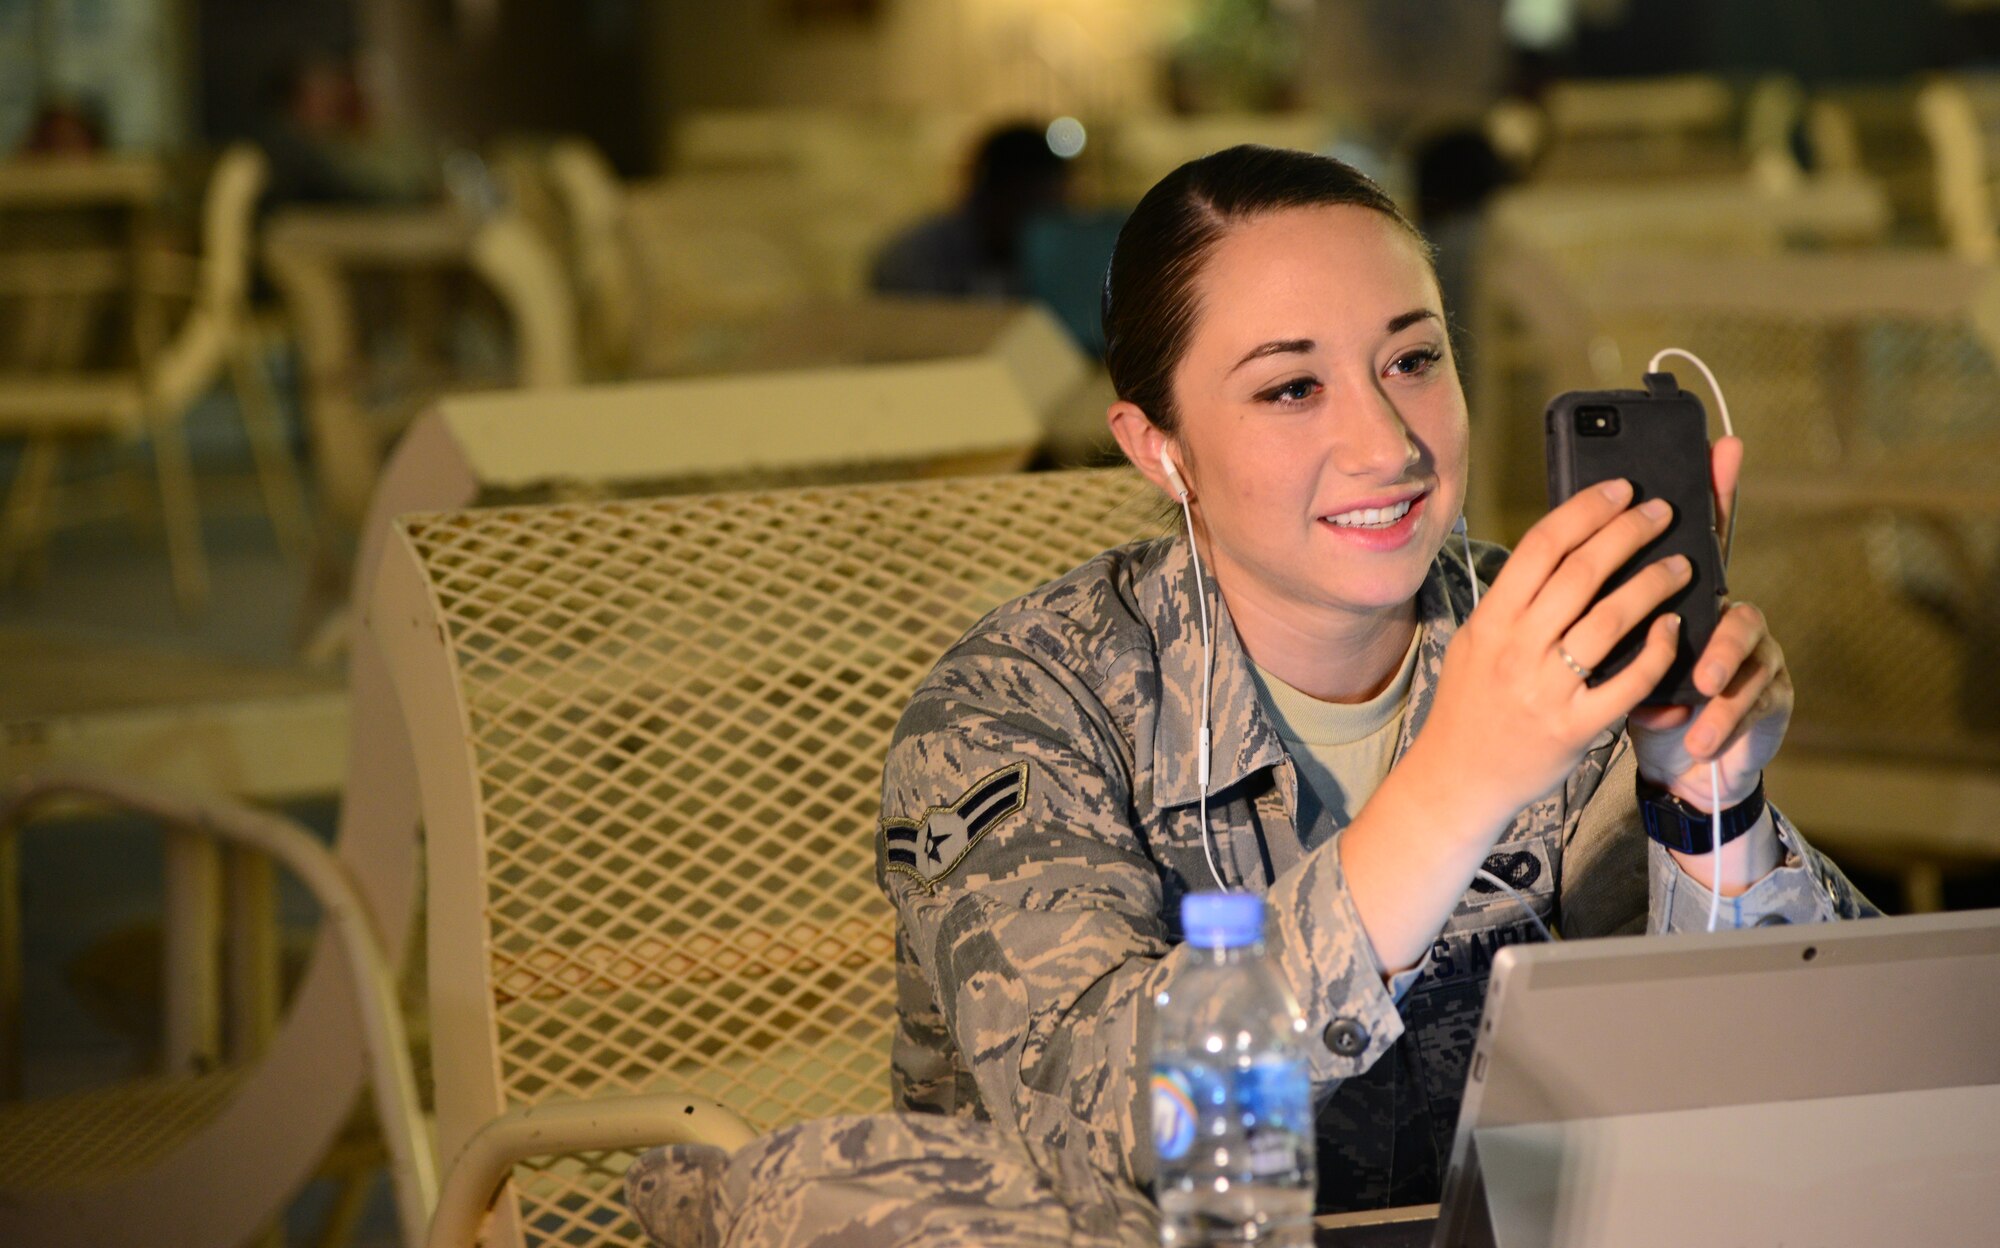 U.S. Air Force Airman 1st Class Cassie Starr, 379th Expeditionary Security Forces Squadron, video-chats with a fifth grade student during the “Holler at a Hero” project Nov. 13, 2014, at Al Udeid Air Base, Qatar. The “Holler at a Hero” project was held in recognition of Veteran’s Day by a Security Forces veteran named James Wilson, who is now a teacher in New Jersey. The project allowed Wilson’s fifth grade class to have face-to-face interaction, via online video-messaging, with deployed servicemembers to discuss their job duties, day-to-day activities and any personal challenges military members face while deployed. (U.S. Air Force photo by Senior Airman Kia Atkins)